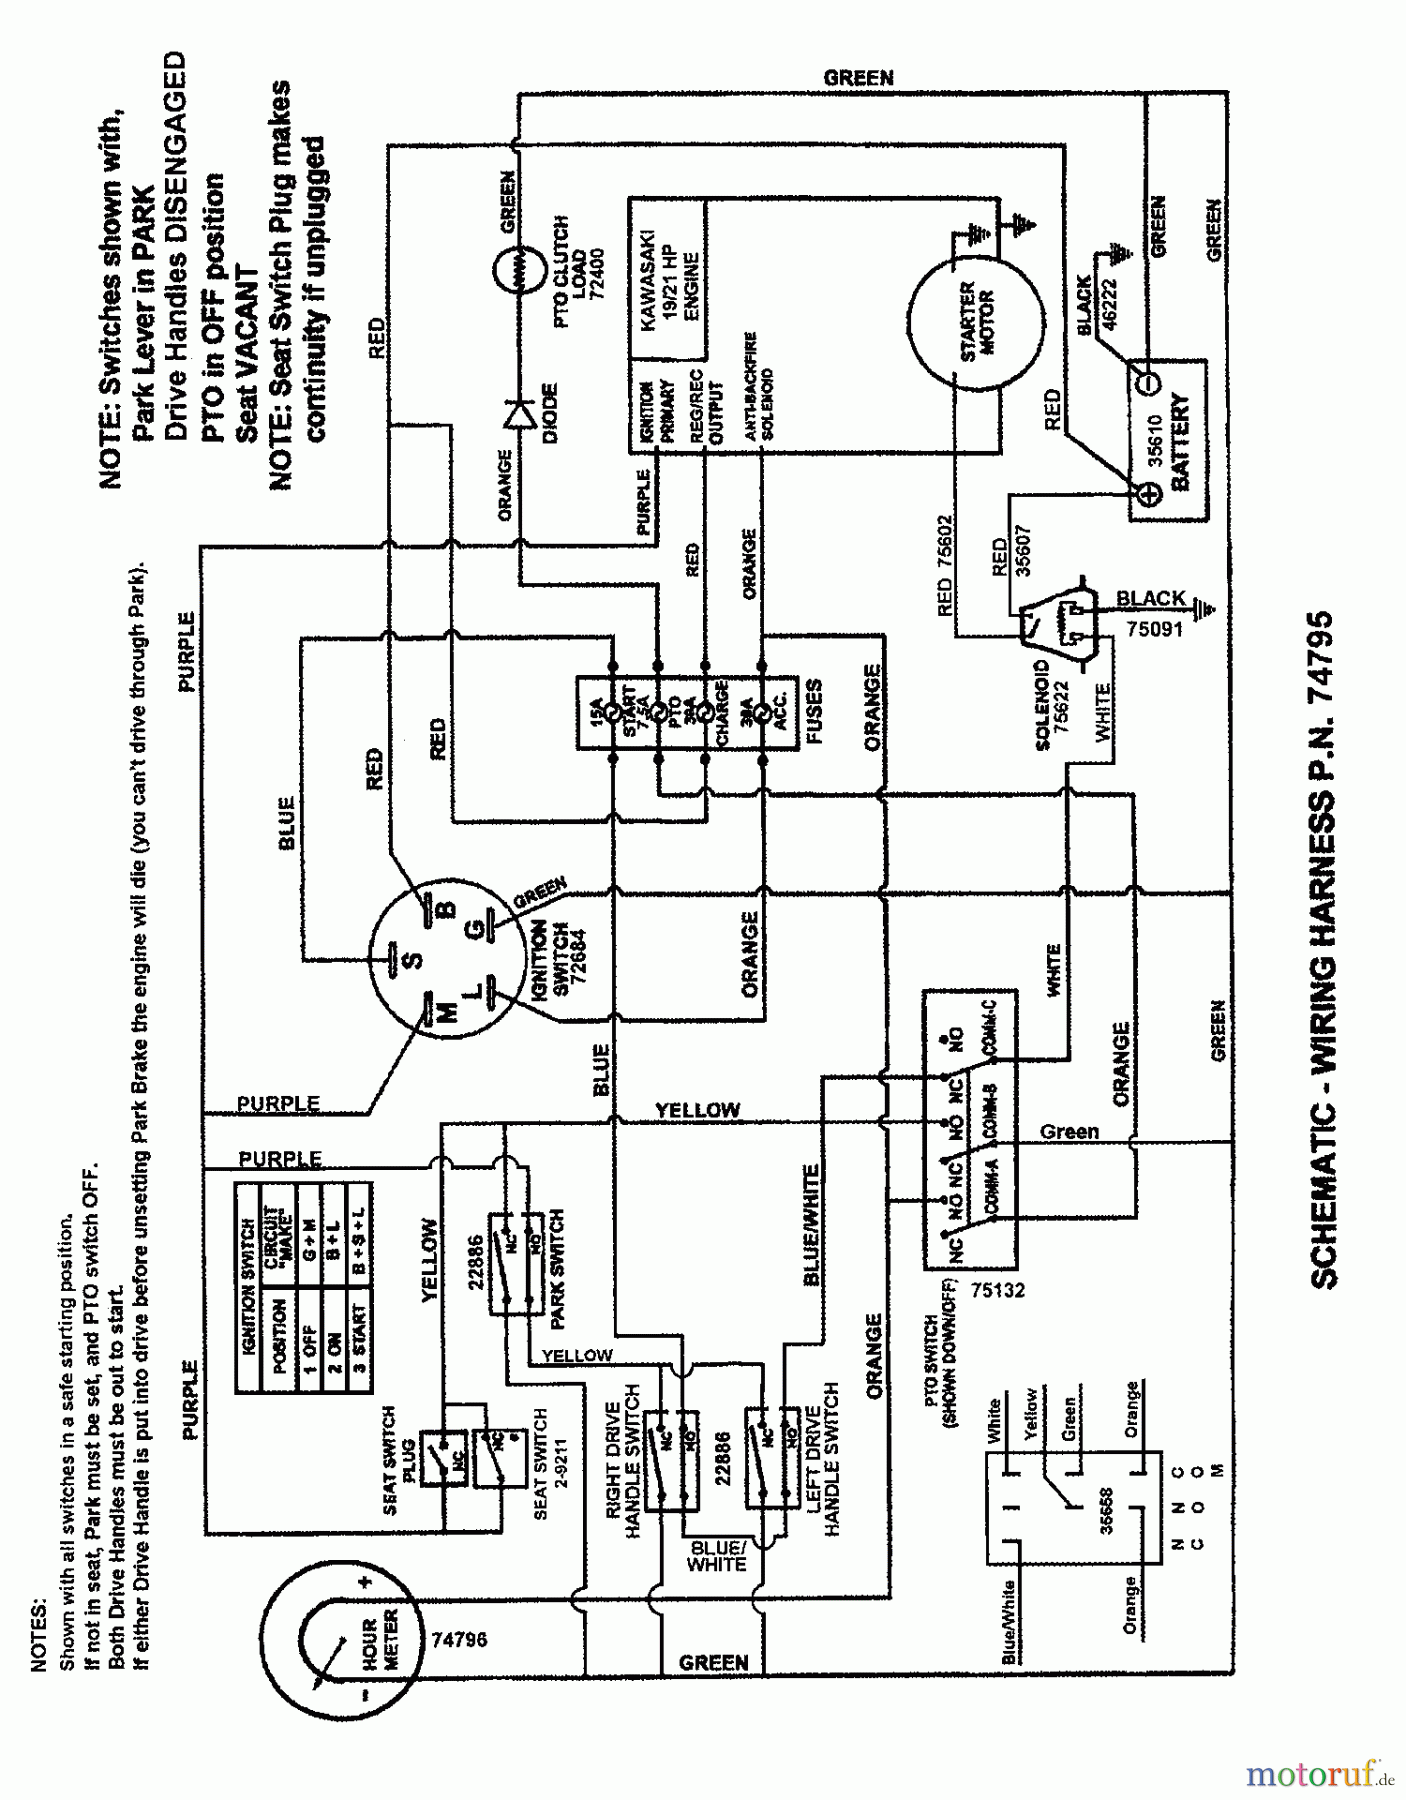 Wiring Diagram For Snapper Riding Mower from www.motoruf.com